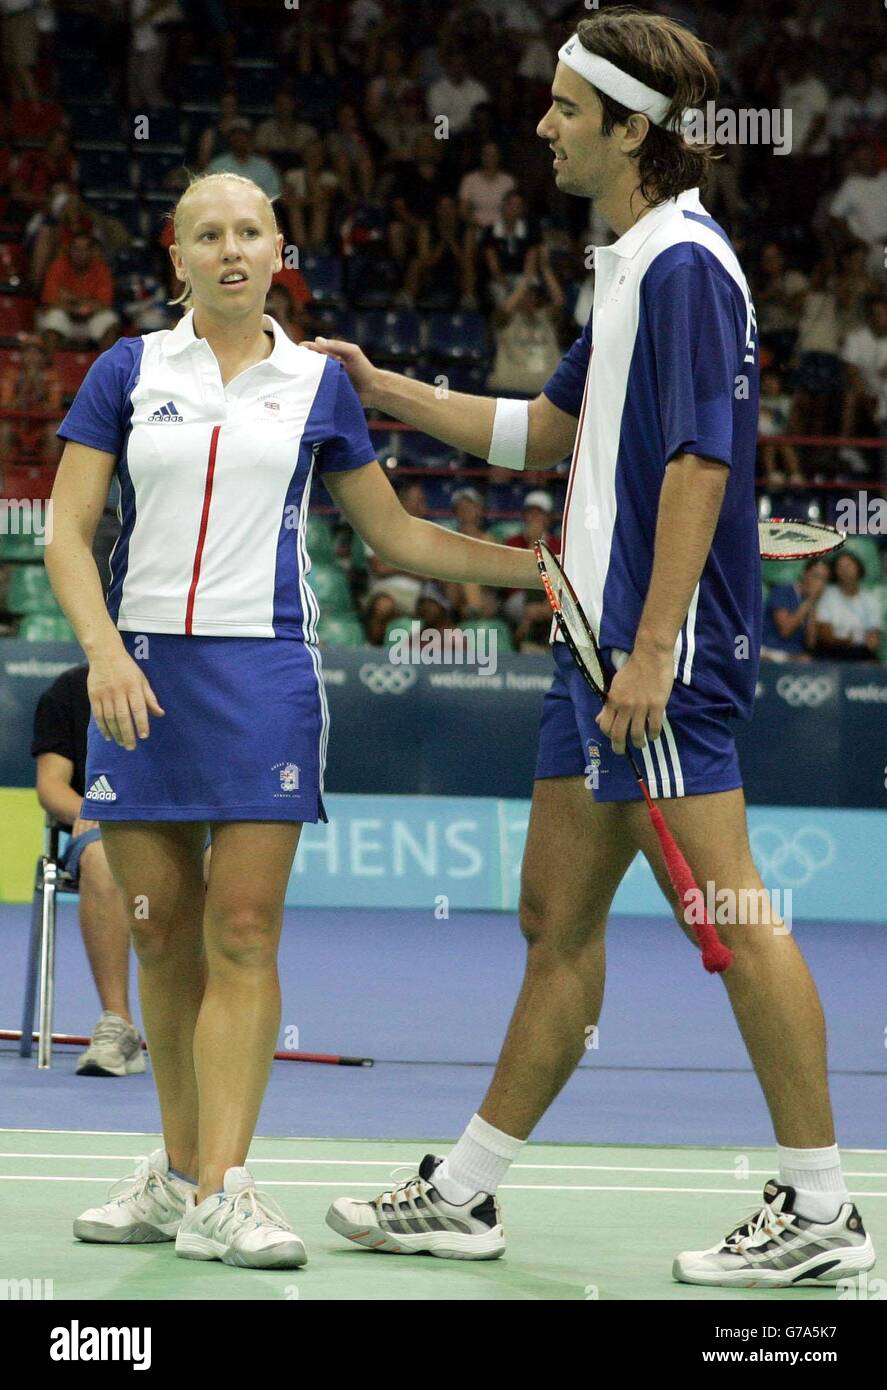 British badminton Silver Medal winners Nathan Robertson and Gail Emms react following their Gold Medal Mixed Doubles match at the Goudi Olympic Hall in Athens, Greece. Emms and Robertson lost to China's Jun Zhang and Ling Gao 1-15 15-12 12-15. Stock Photo